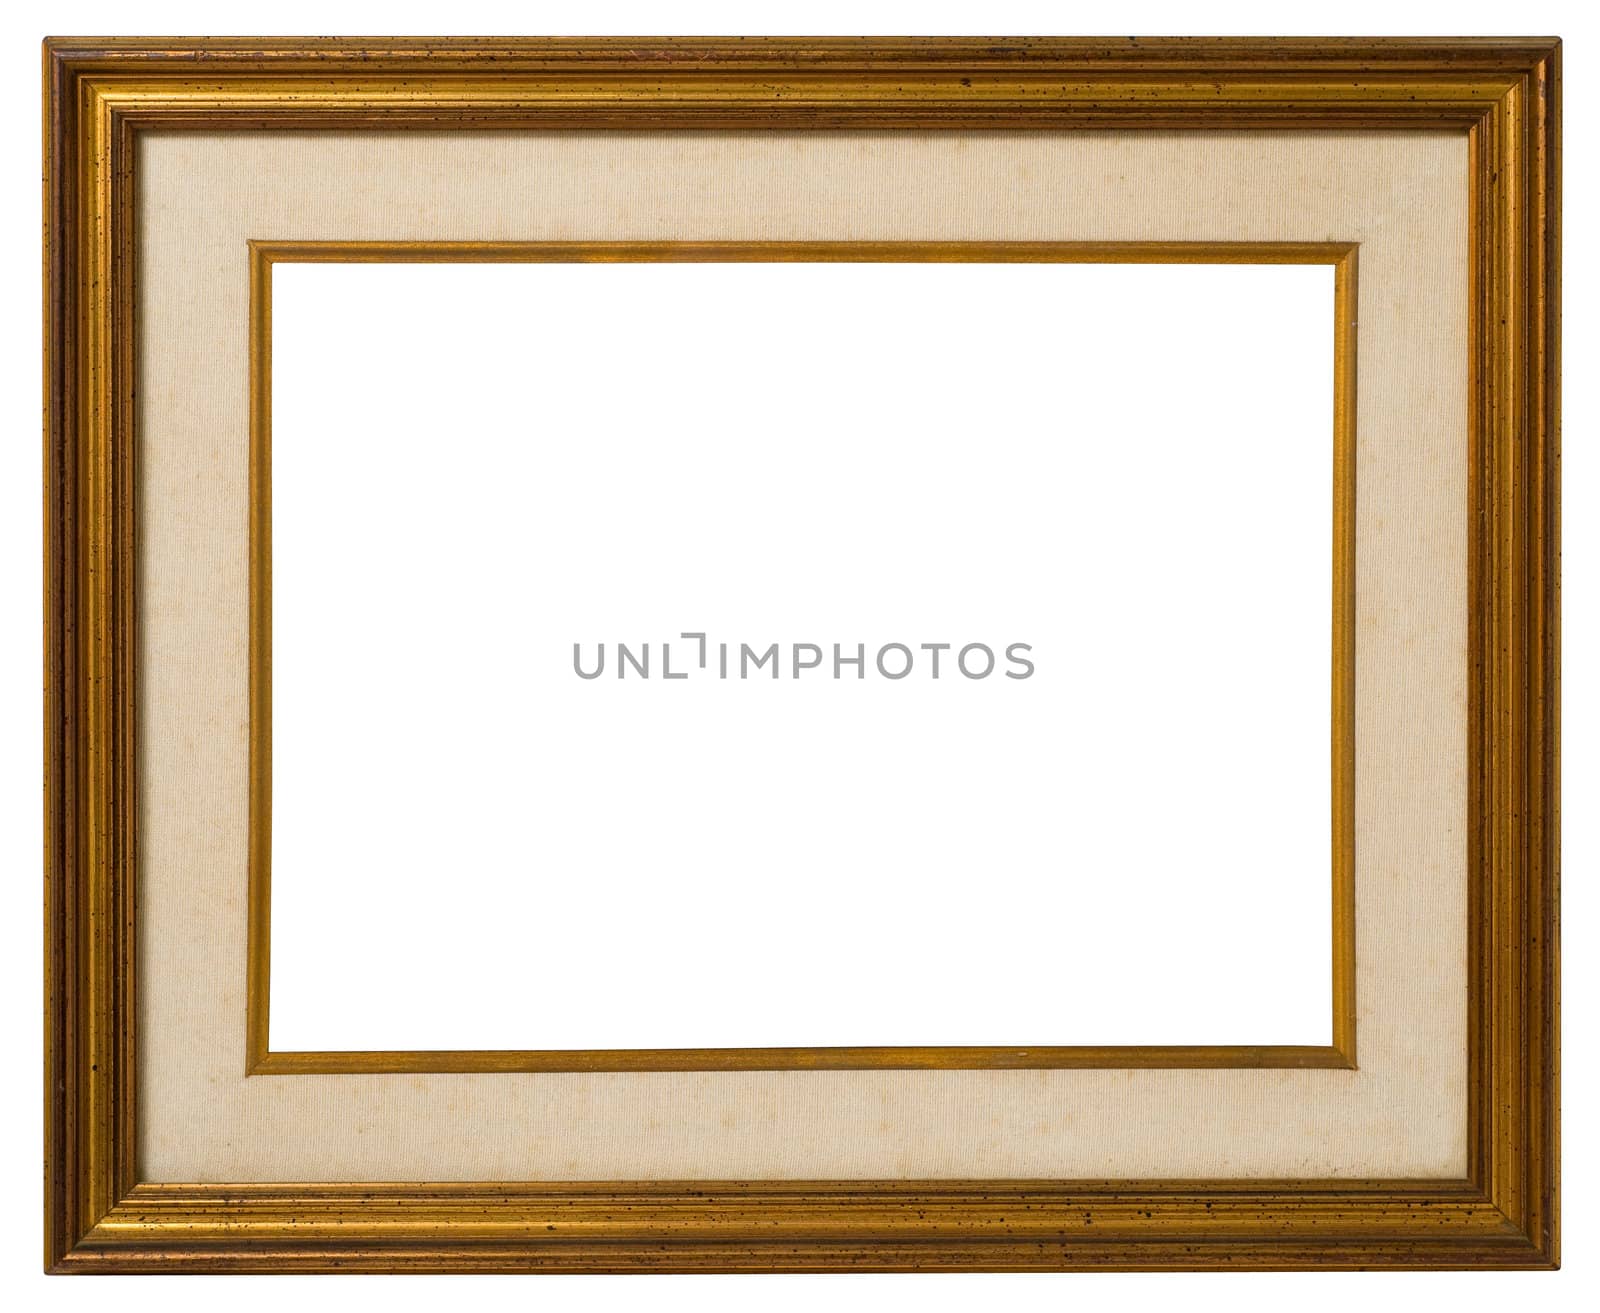 Antique double frame: gilded wood and canvas, italian style,  isolated on white background - include clipping path.